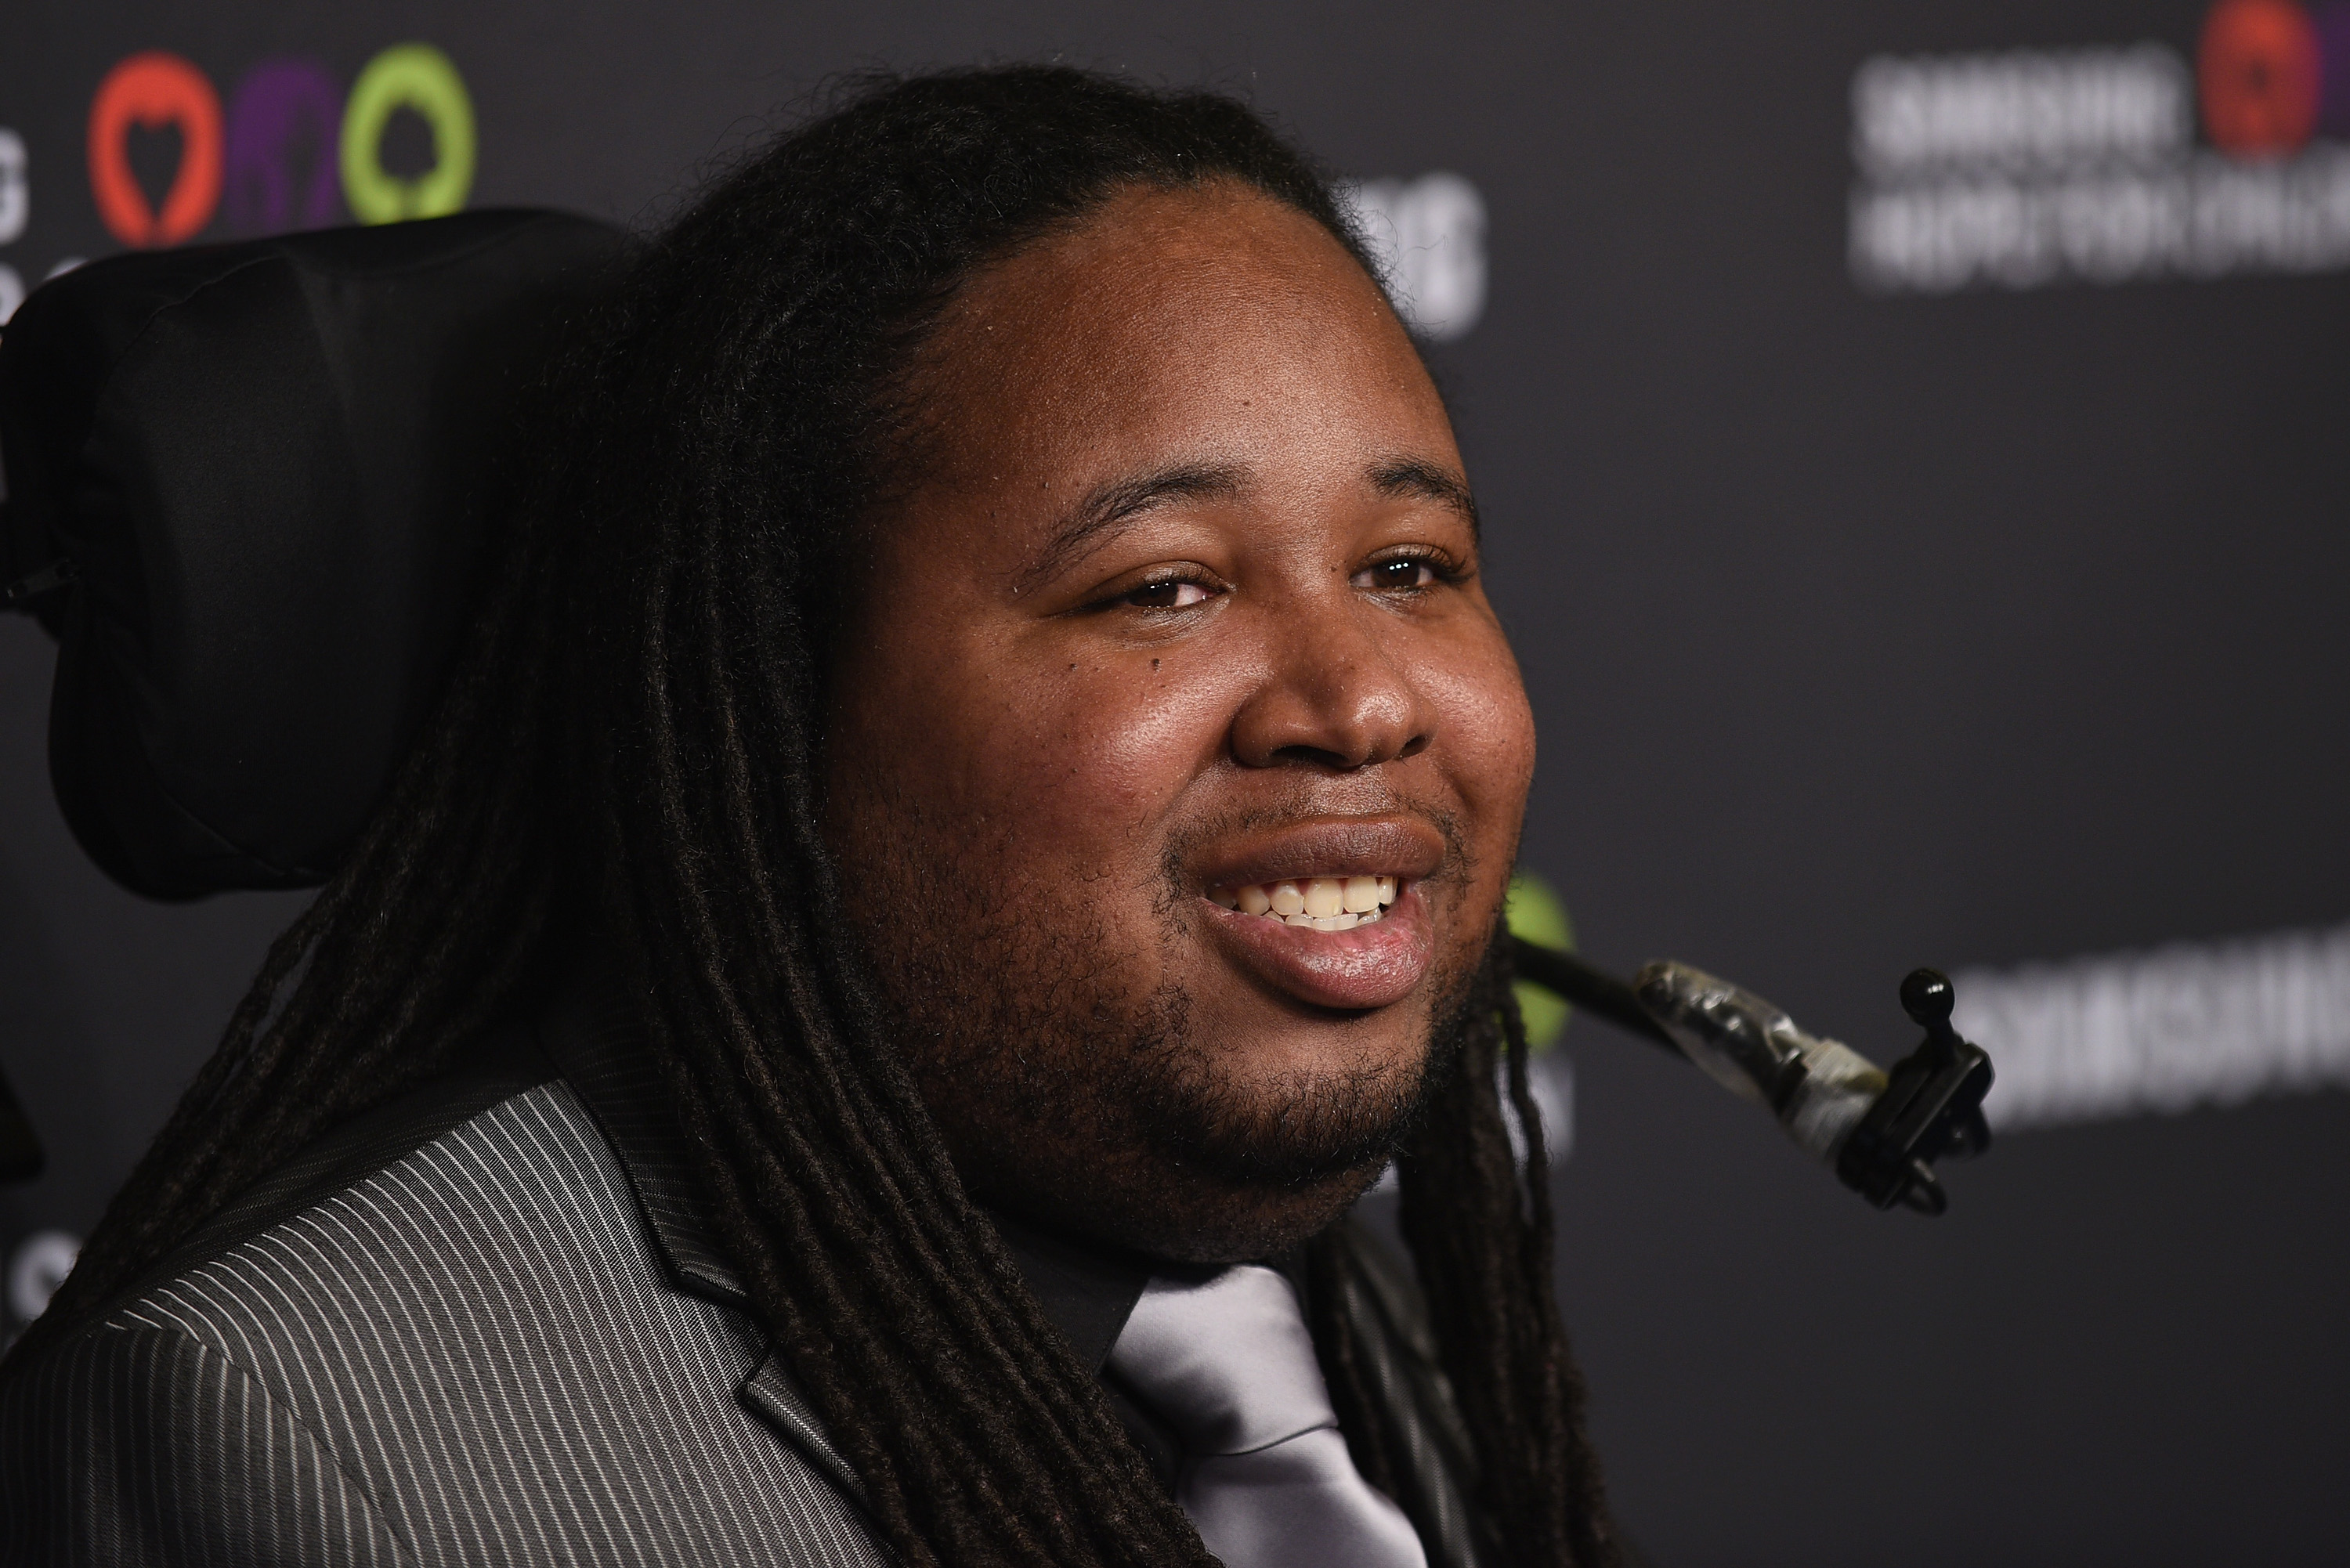 Eric LeGrand Overcame One of the Biggest Tragedies in Football History To Inspire Others